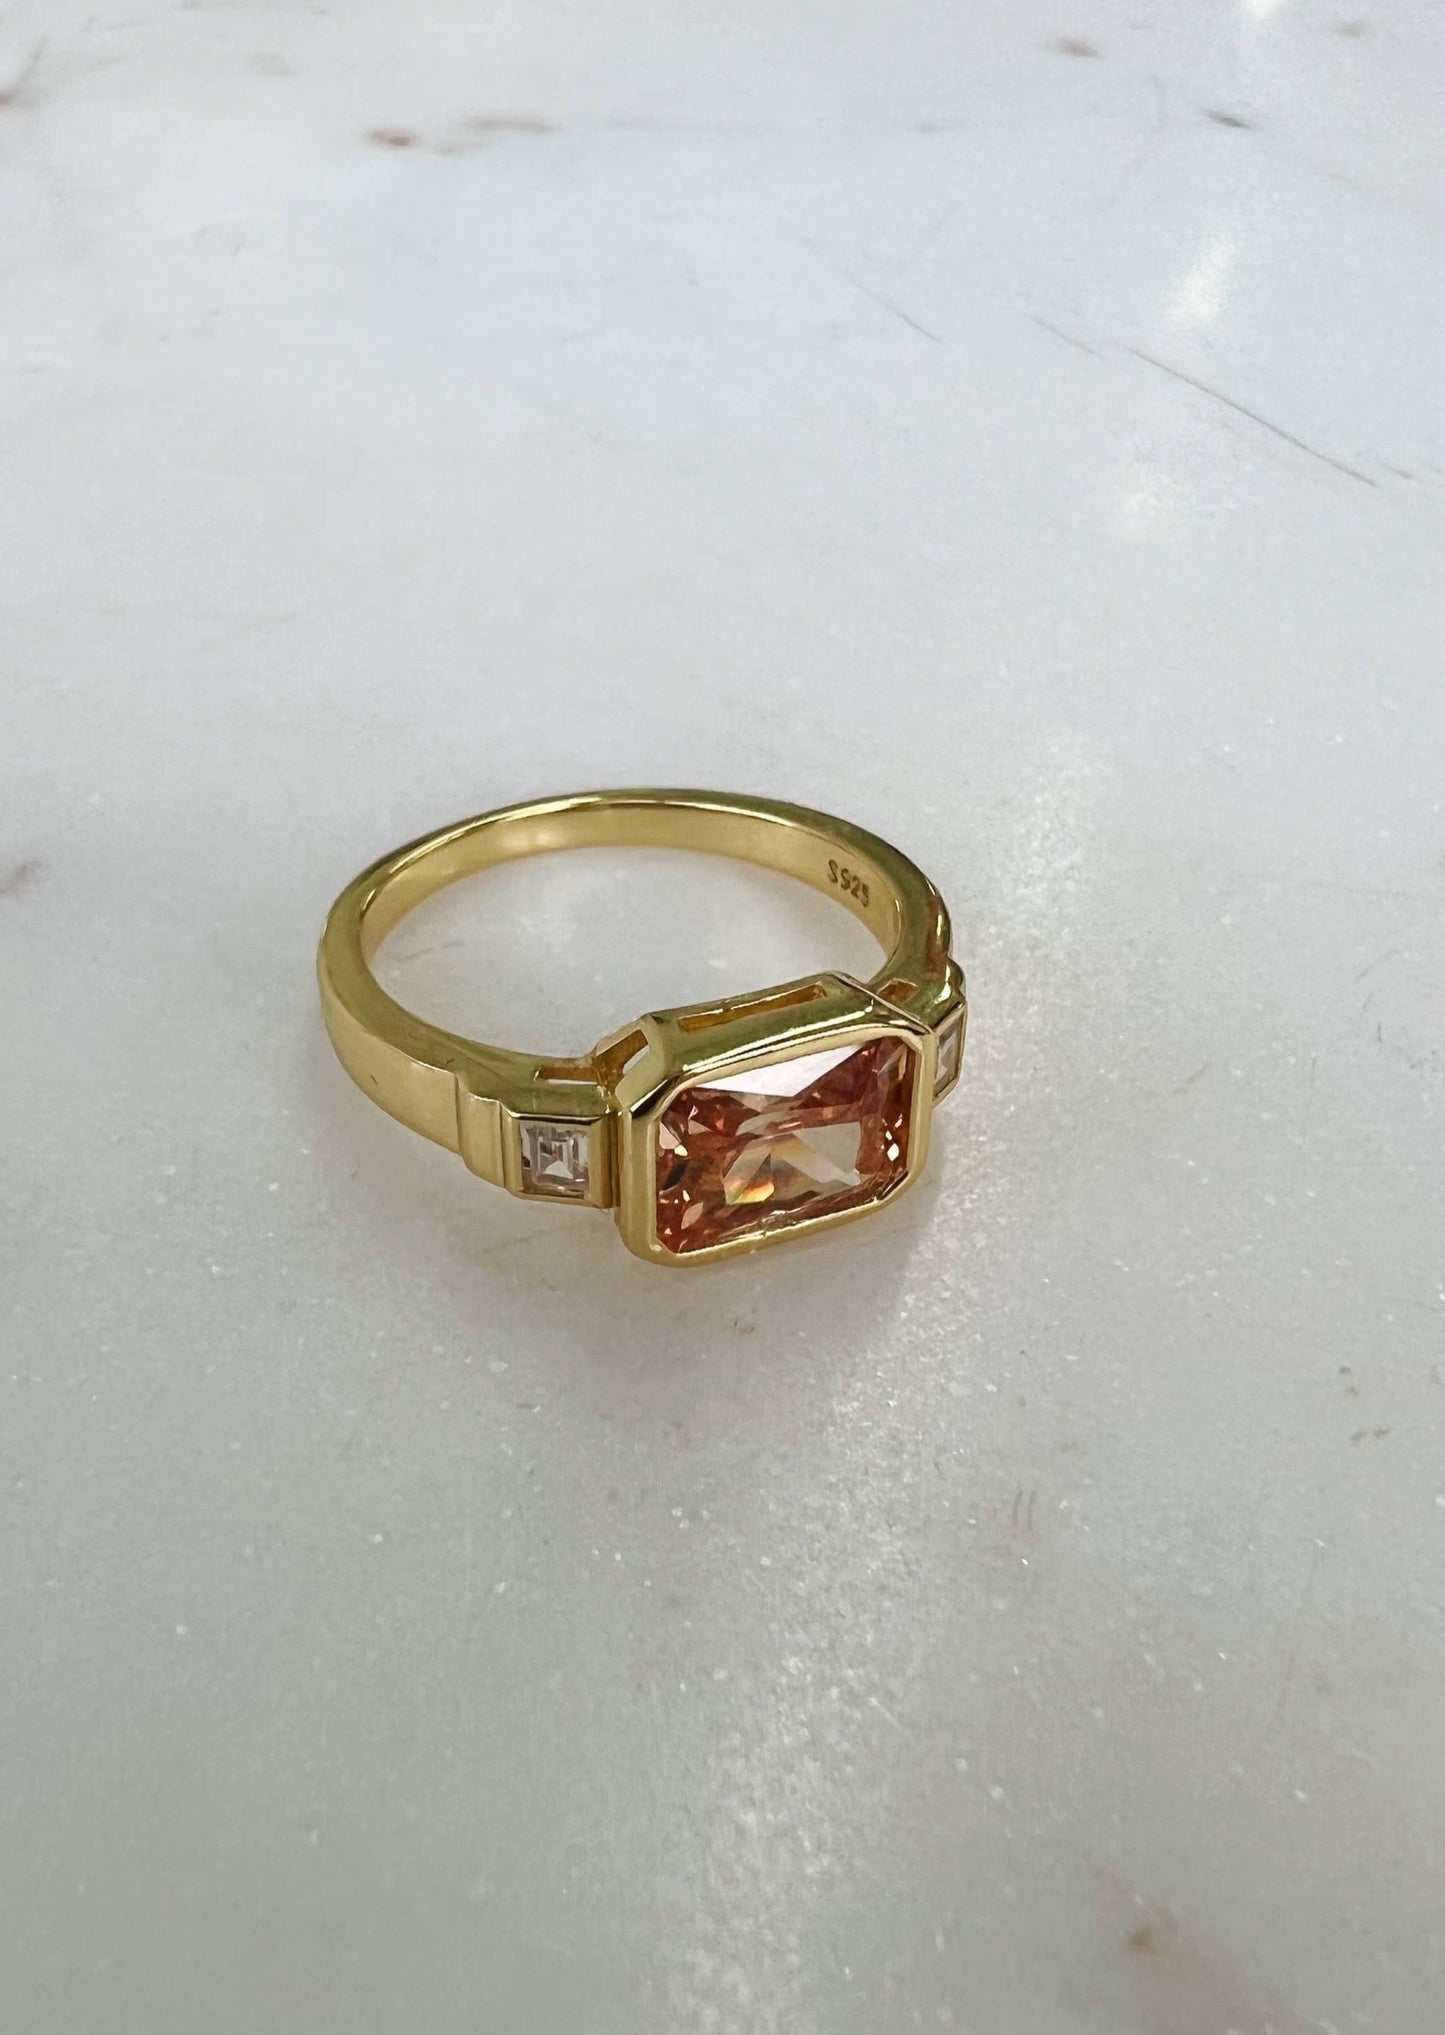 The Scinti Ring